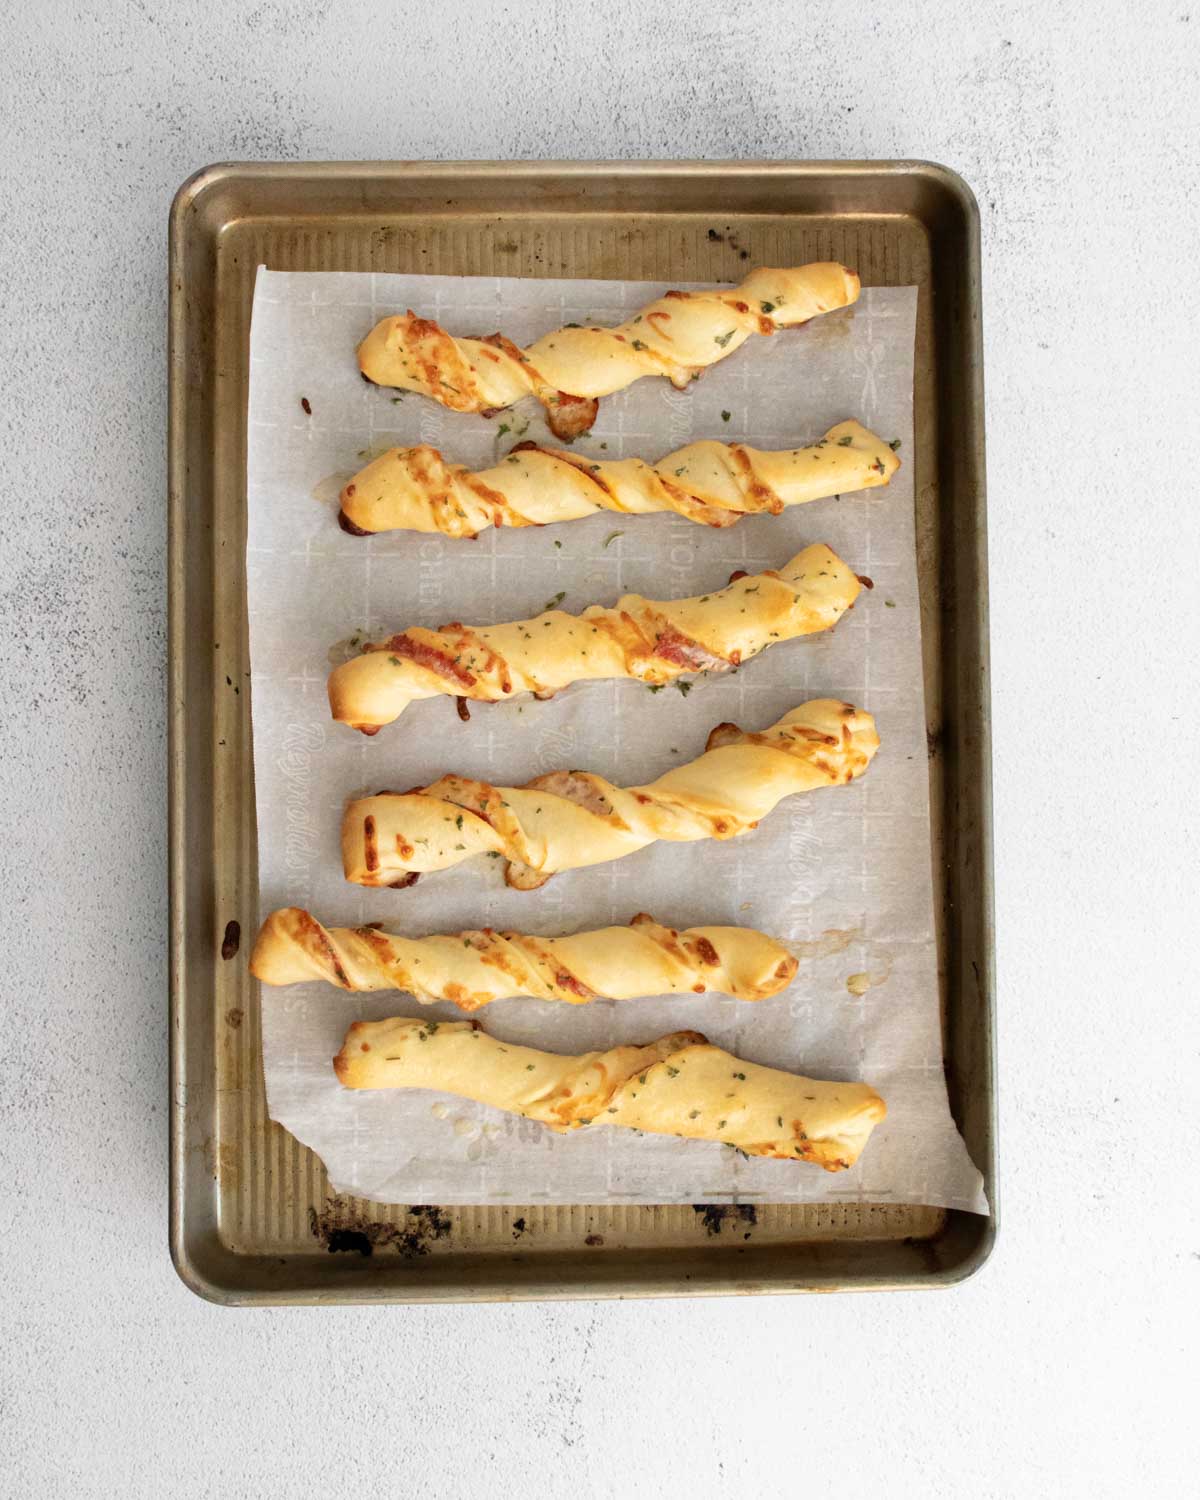 Baked pizza twists on a baking sheet